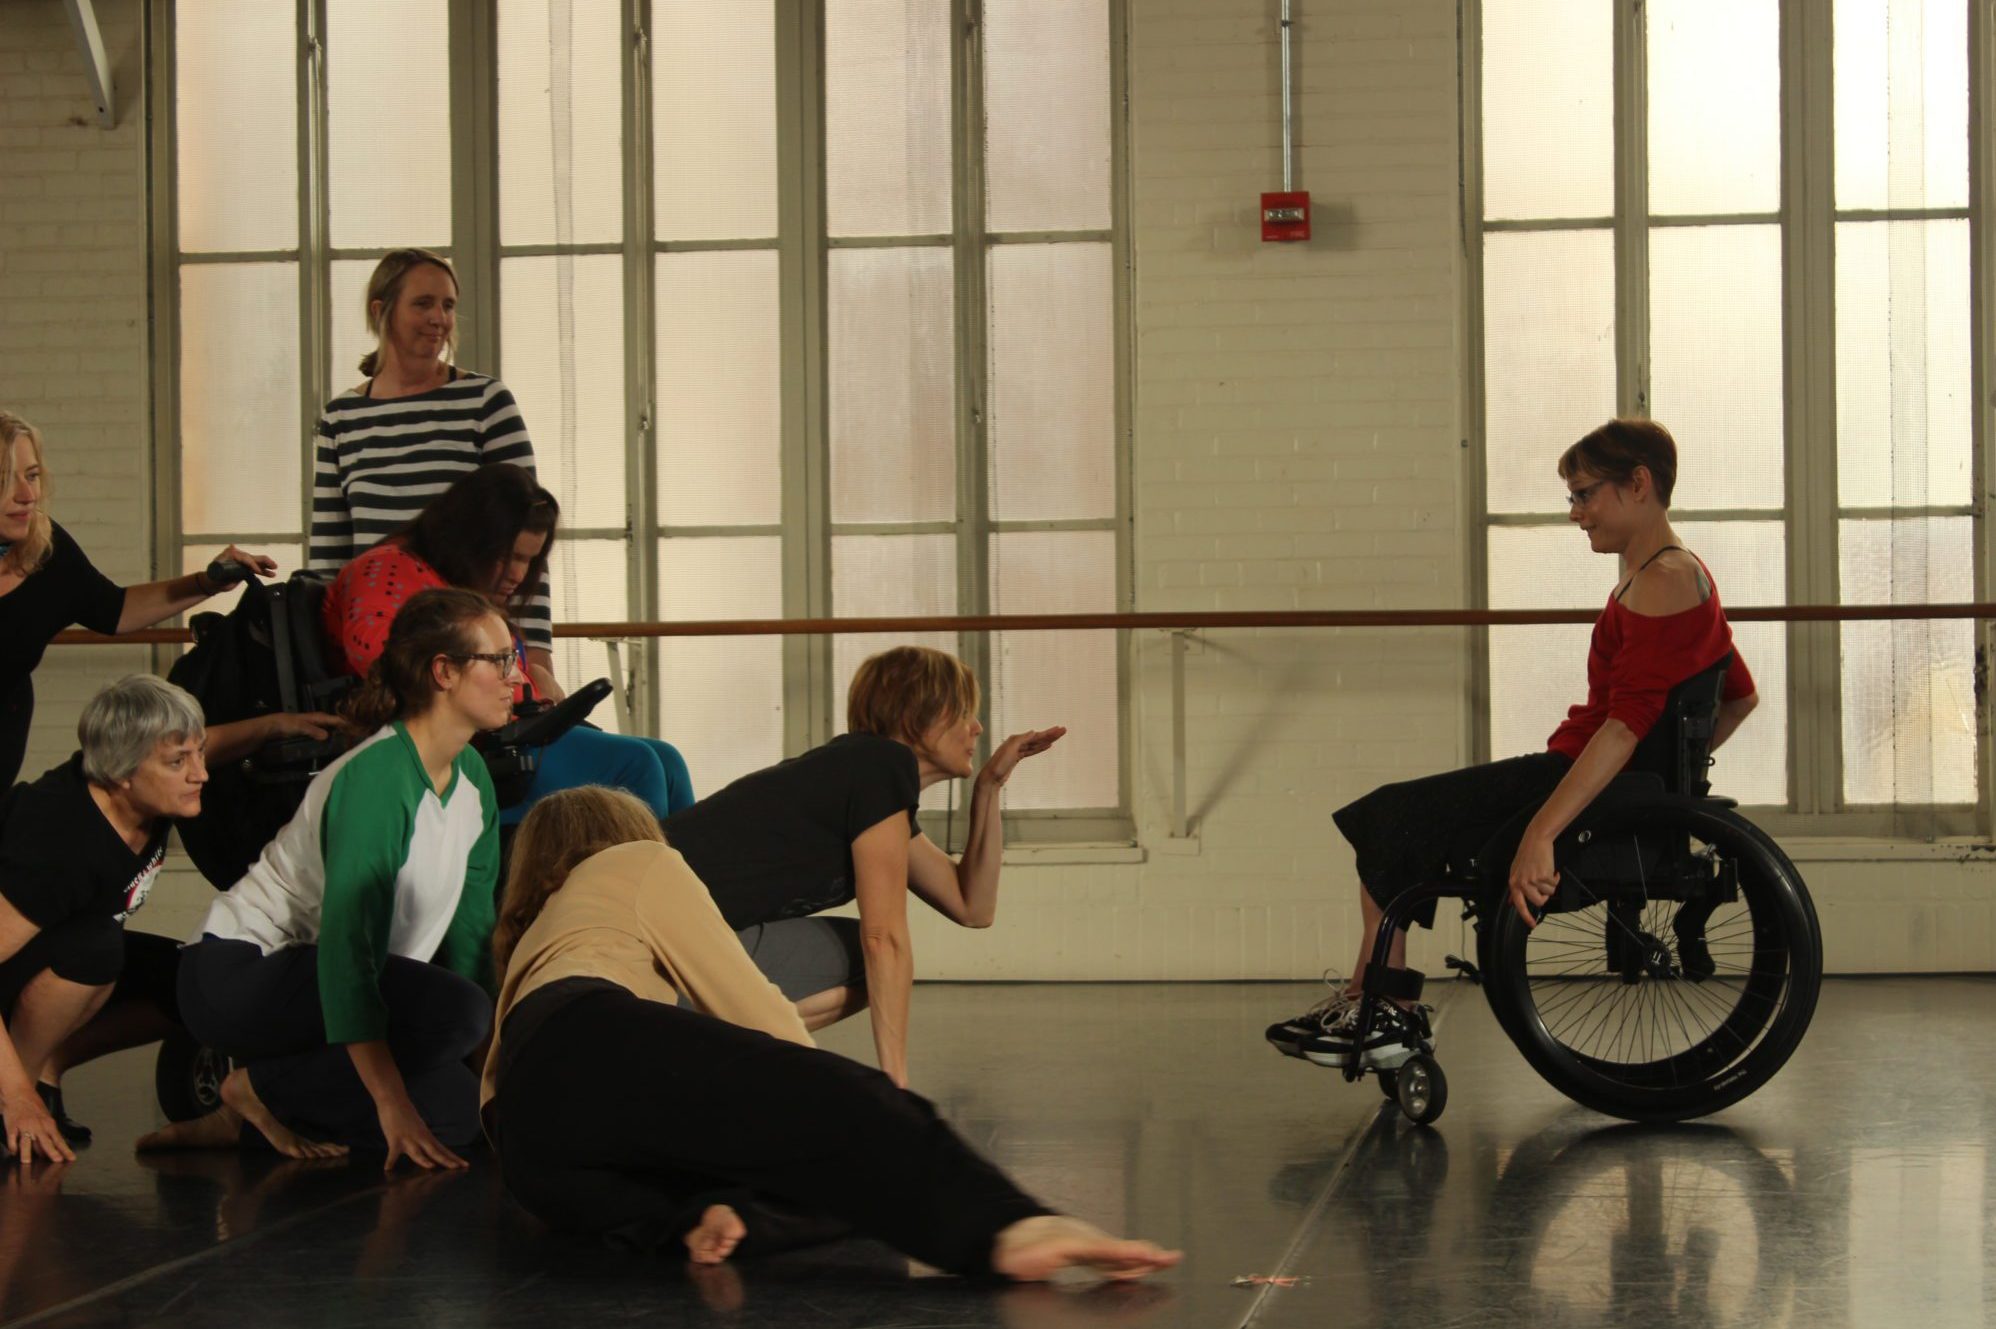 A group of 8 dancers with and without disabilities in a dance studio. 7 dancers crouch towards the ground smiling at a sit-down dancer who is facing them.